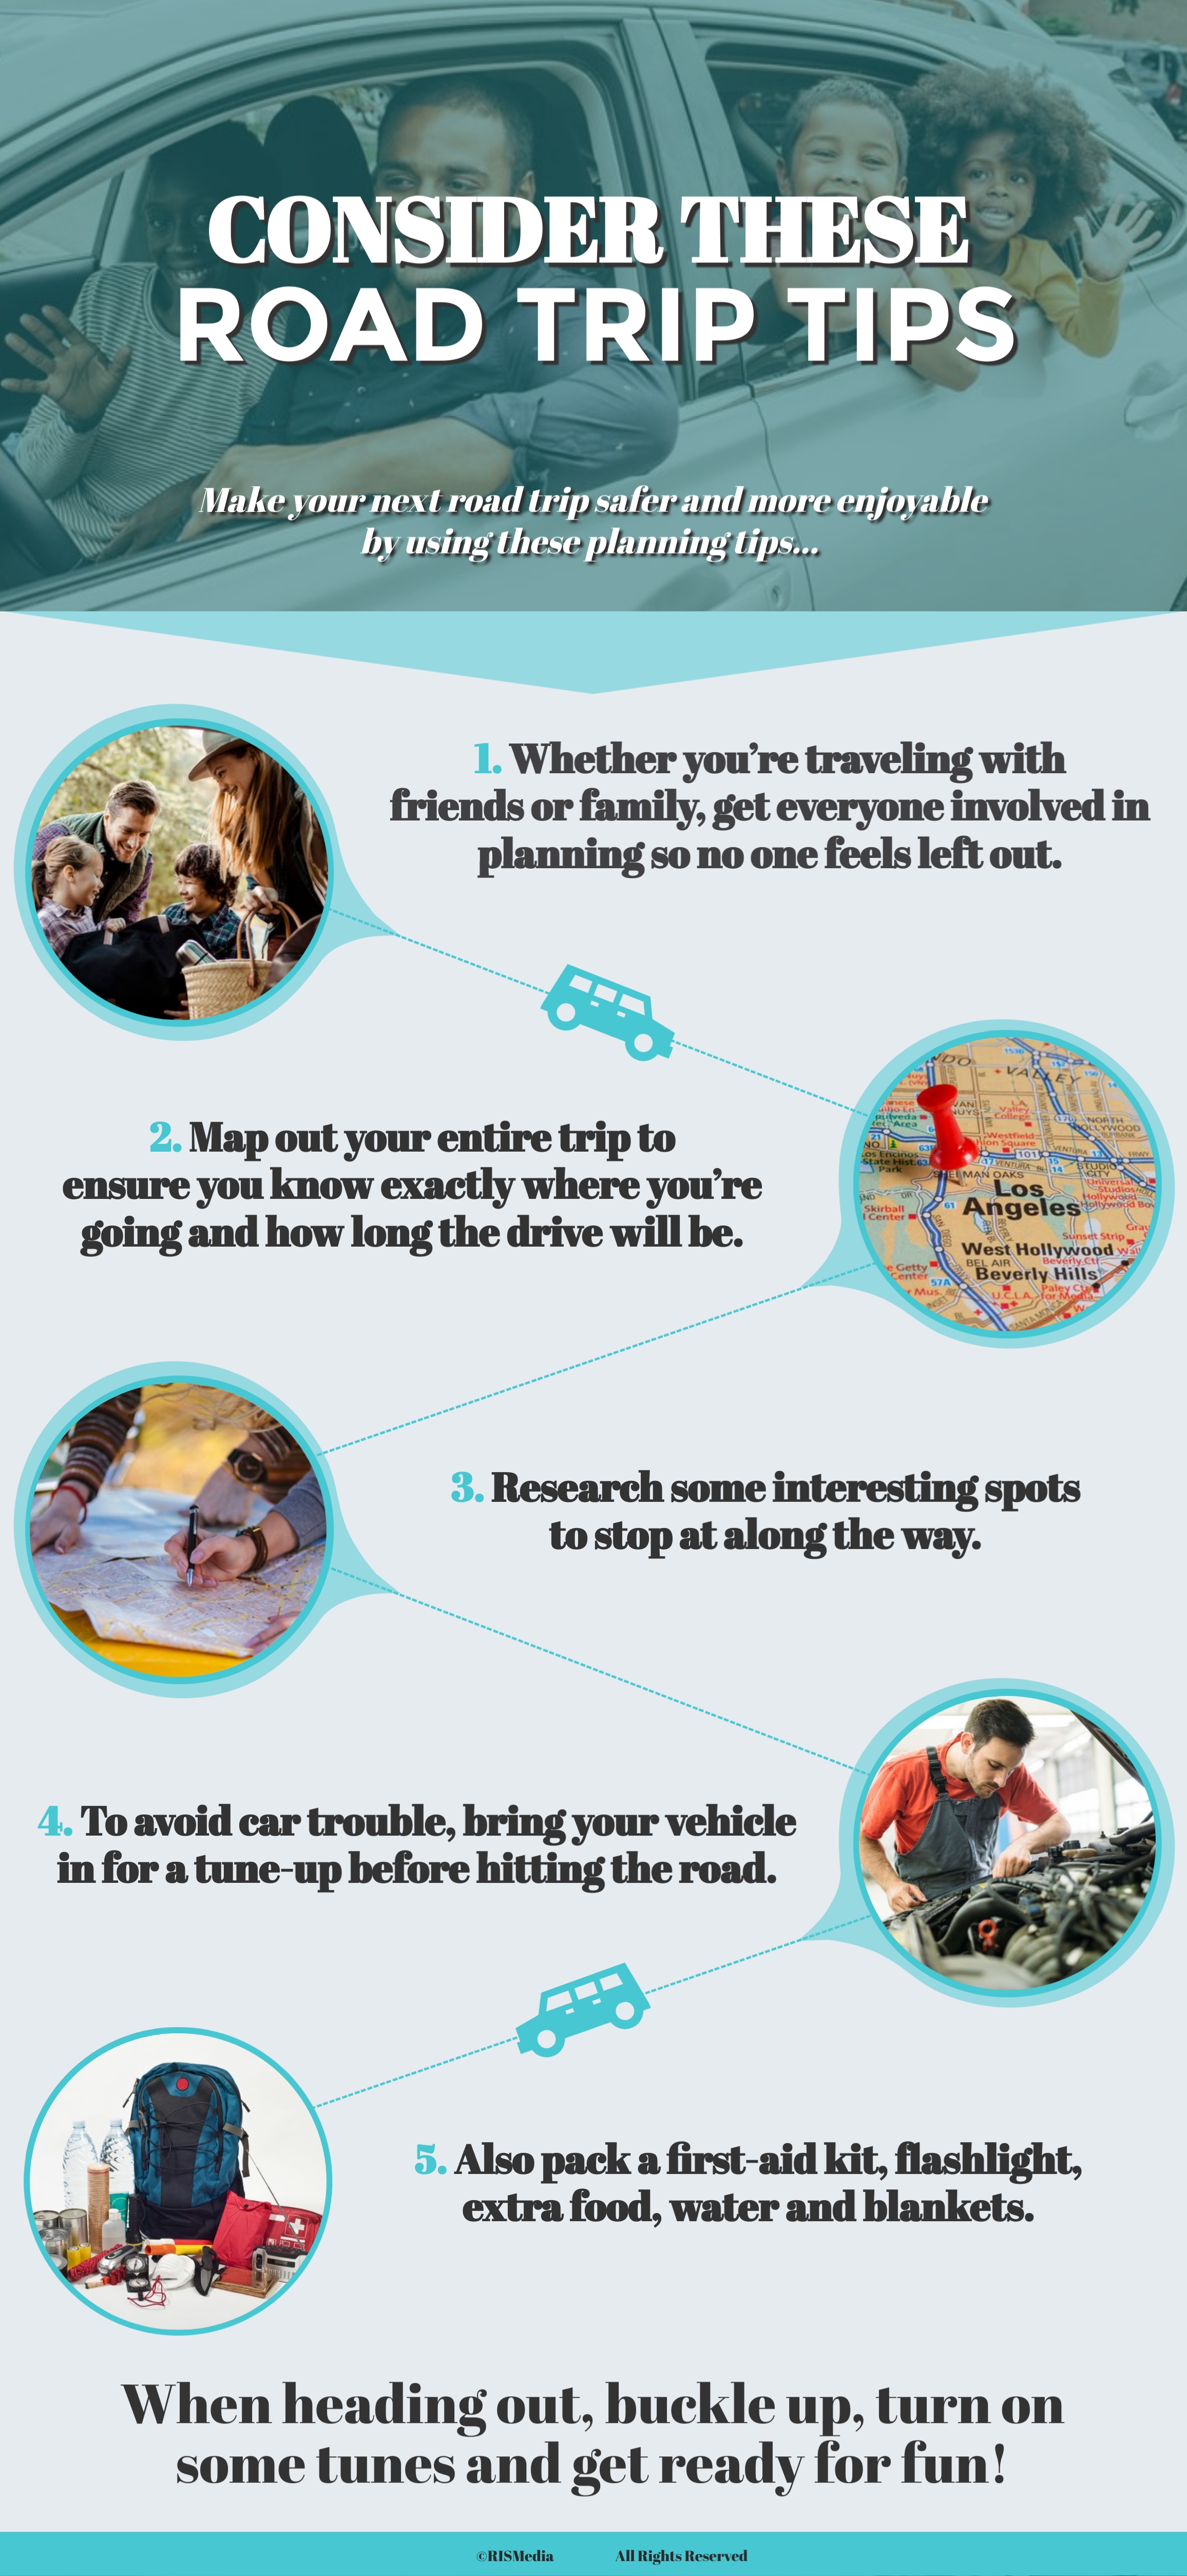 tips for road trip with 2 month old